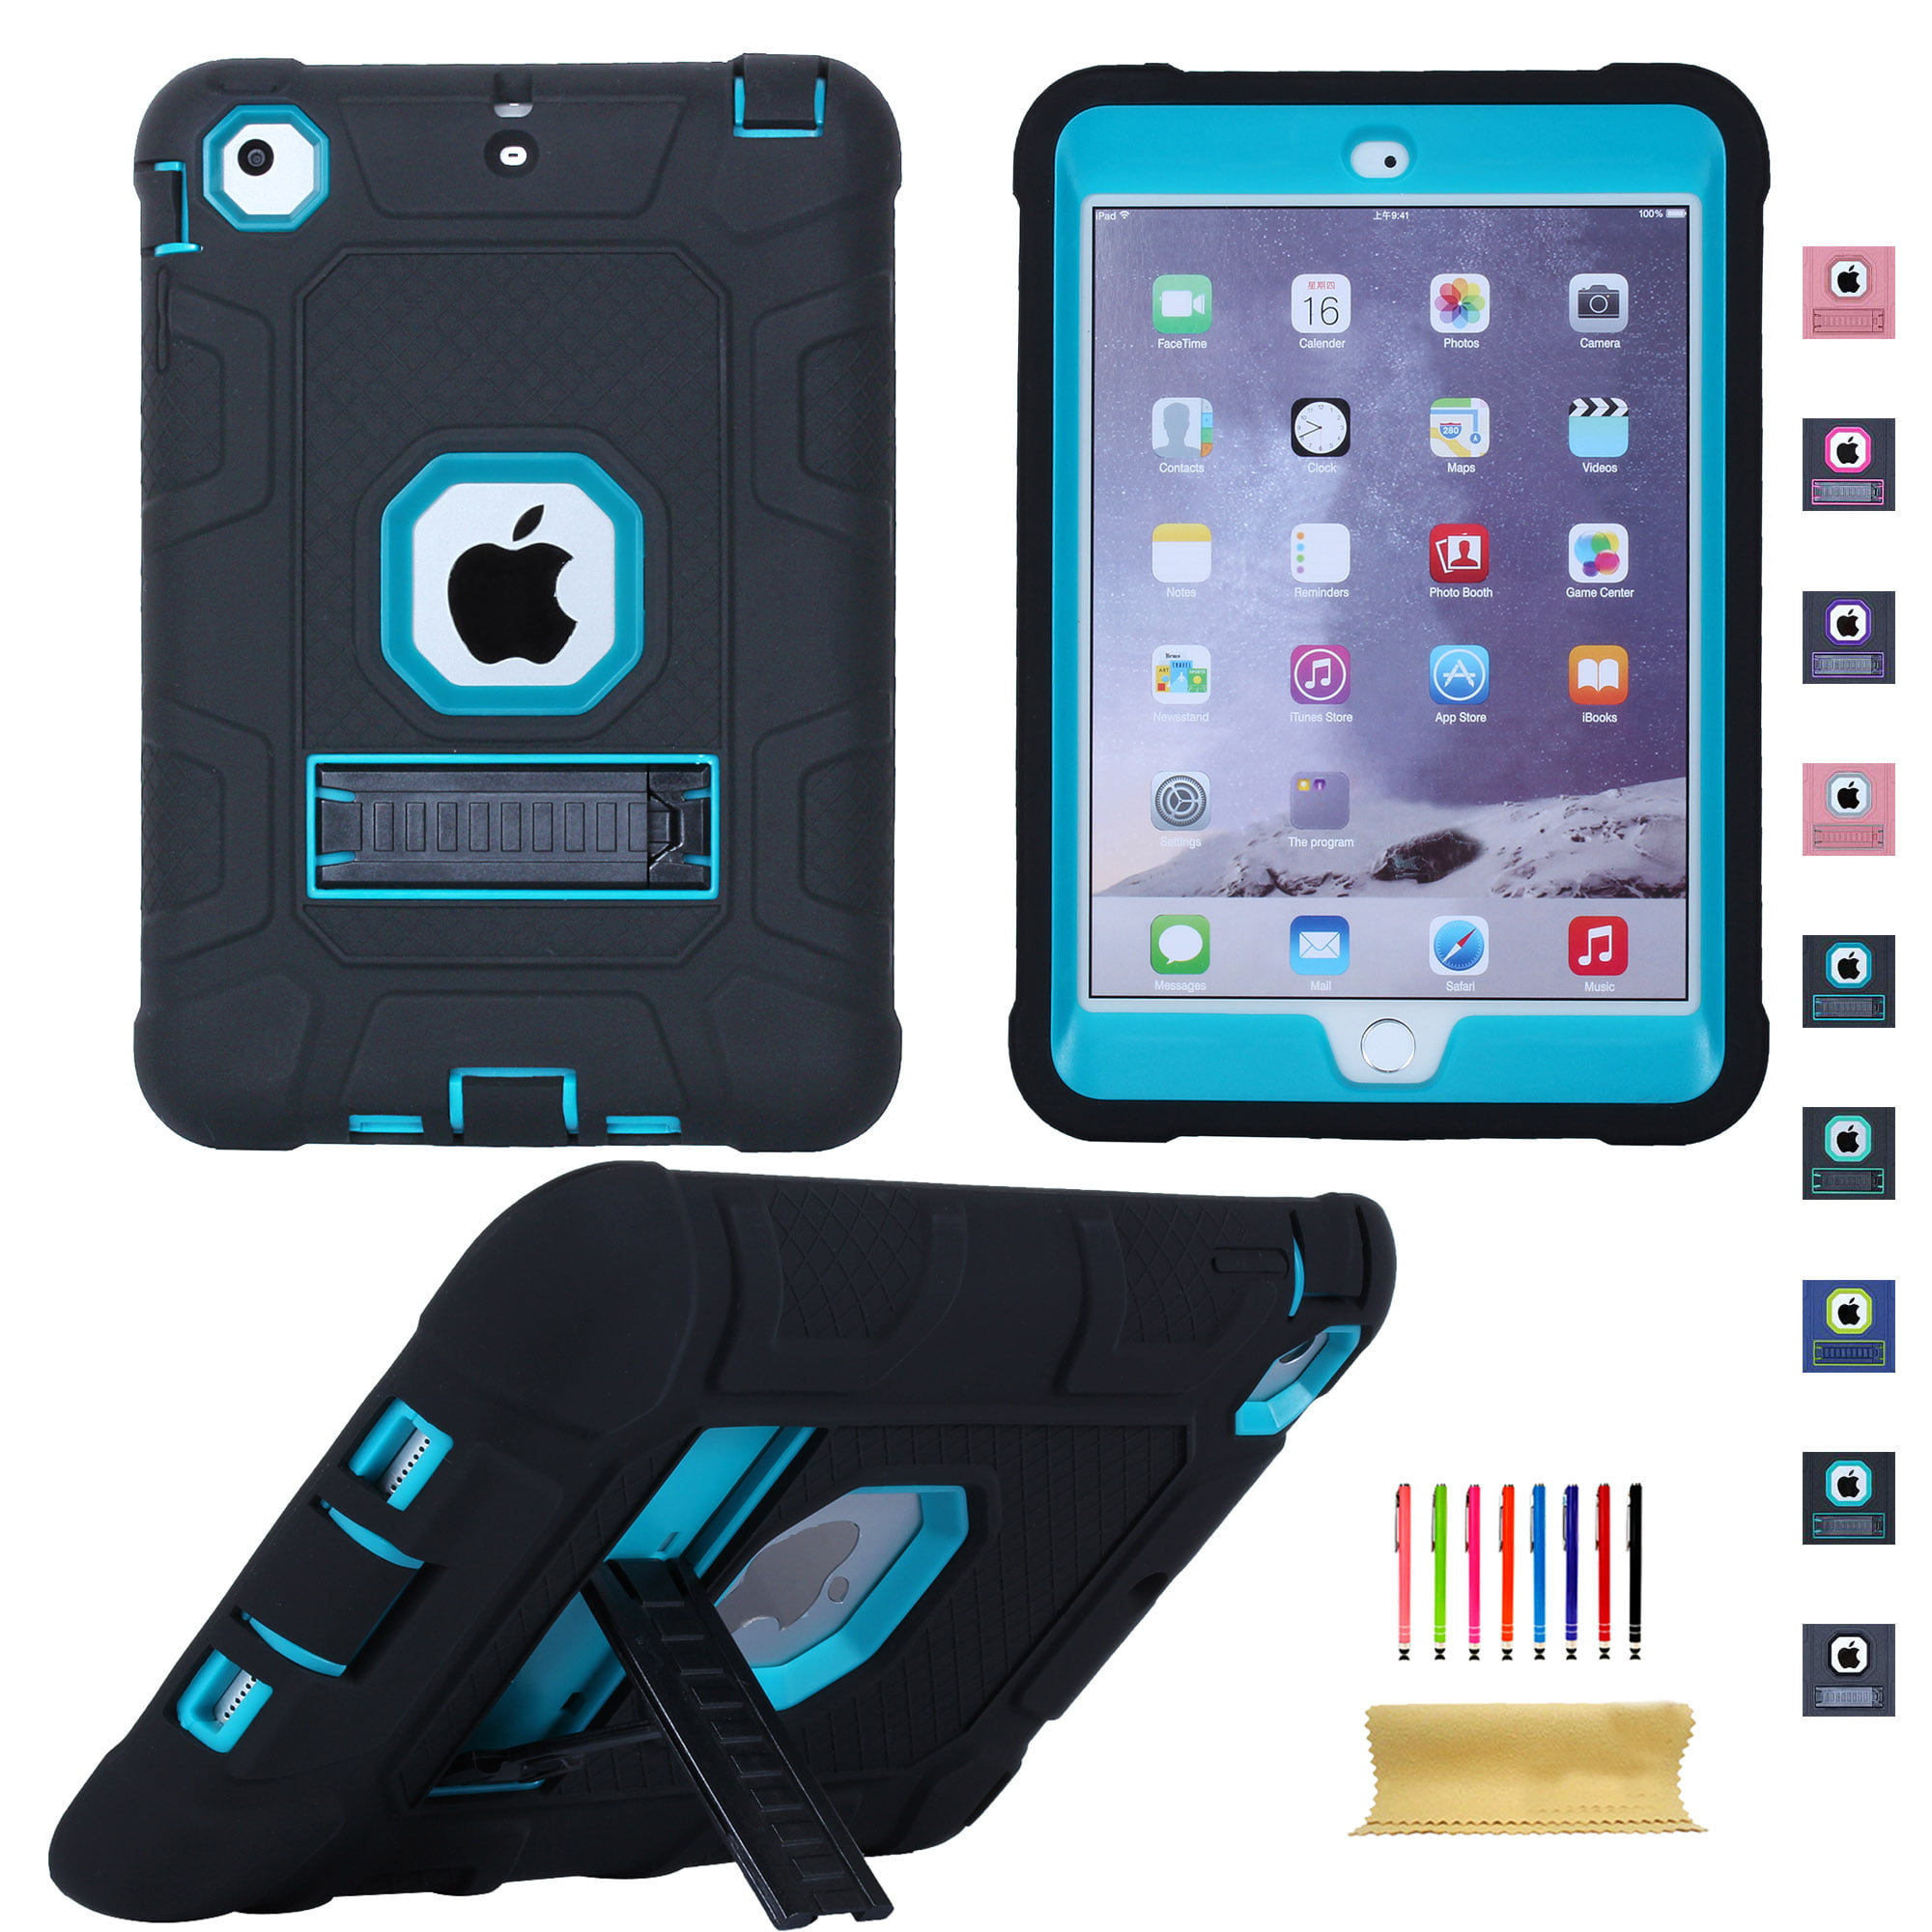 Dteck For iPad mini 1 2 3 Shockproof Protective Stand Heavy Hybrid